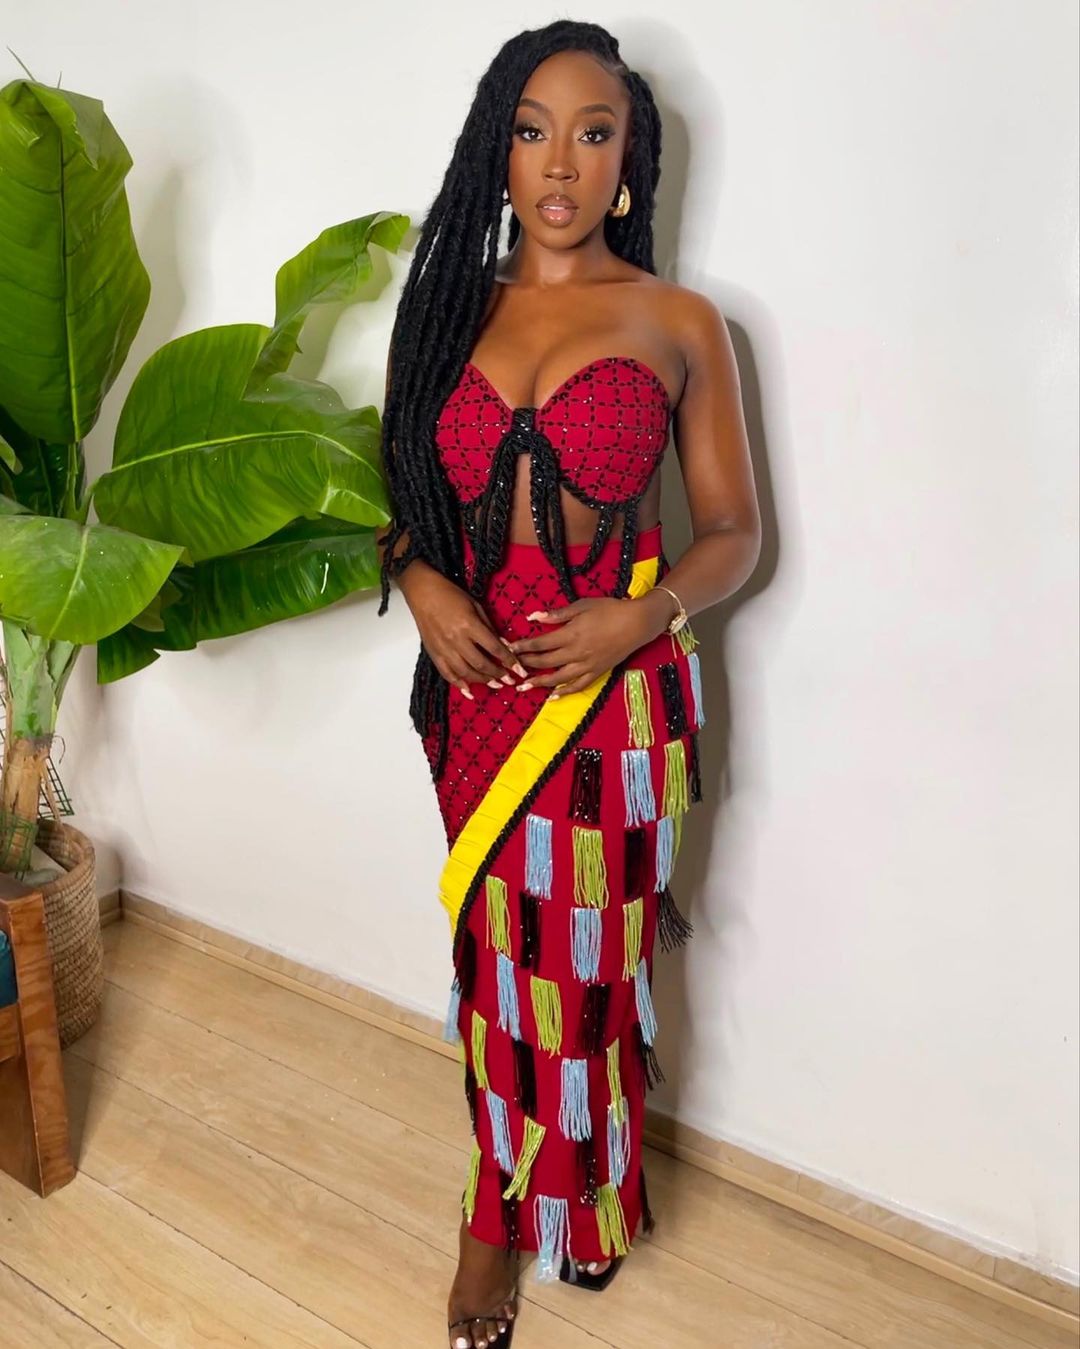 the-black-celebrities-were-fabsolutely-ready-for-the-holidays